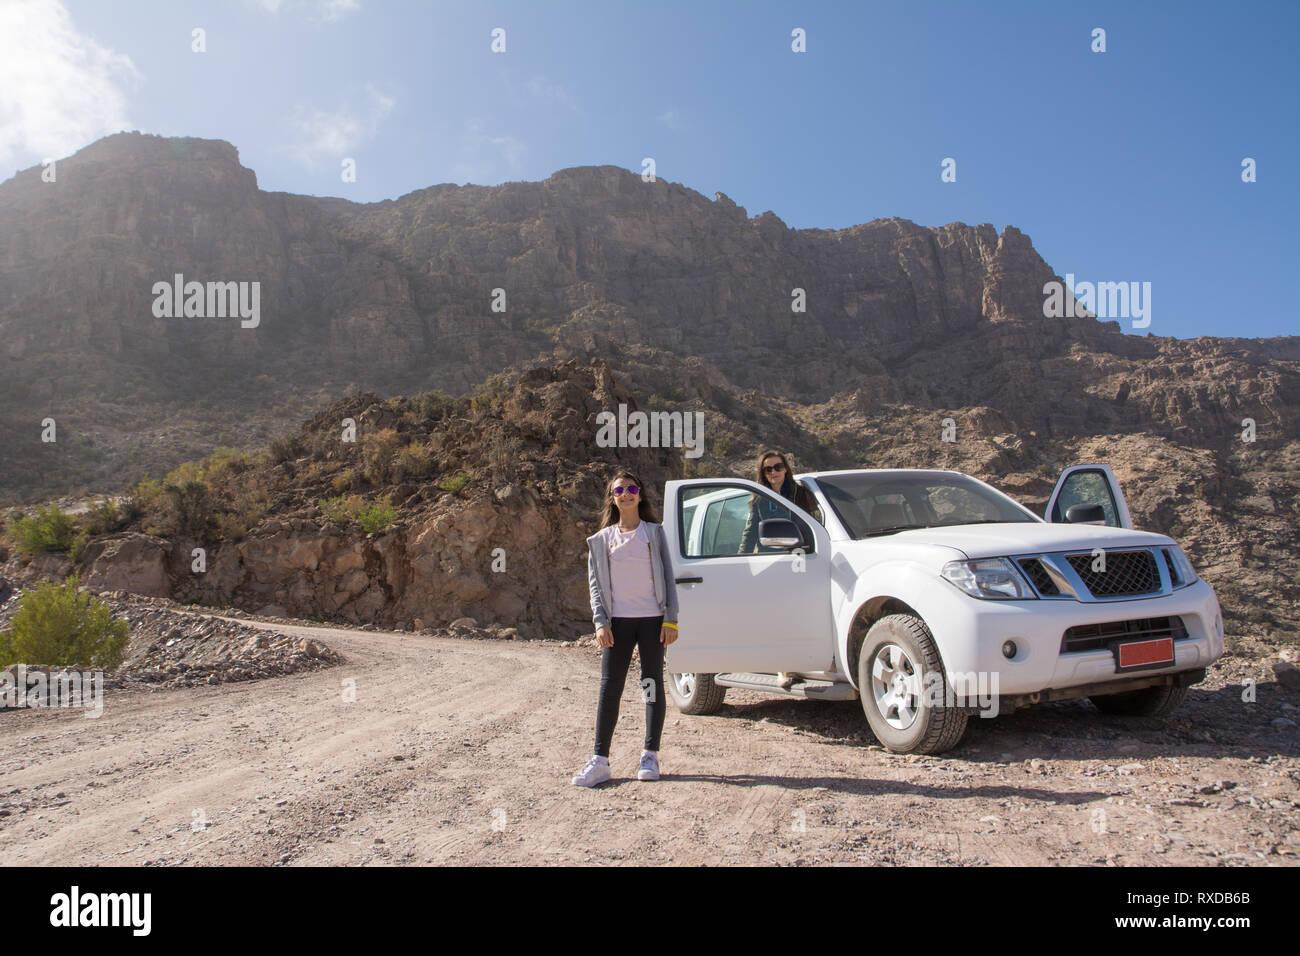 Off-road vehicle and tourists on the Jebel Shams mountains (Oman) Stock Photo